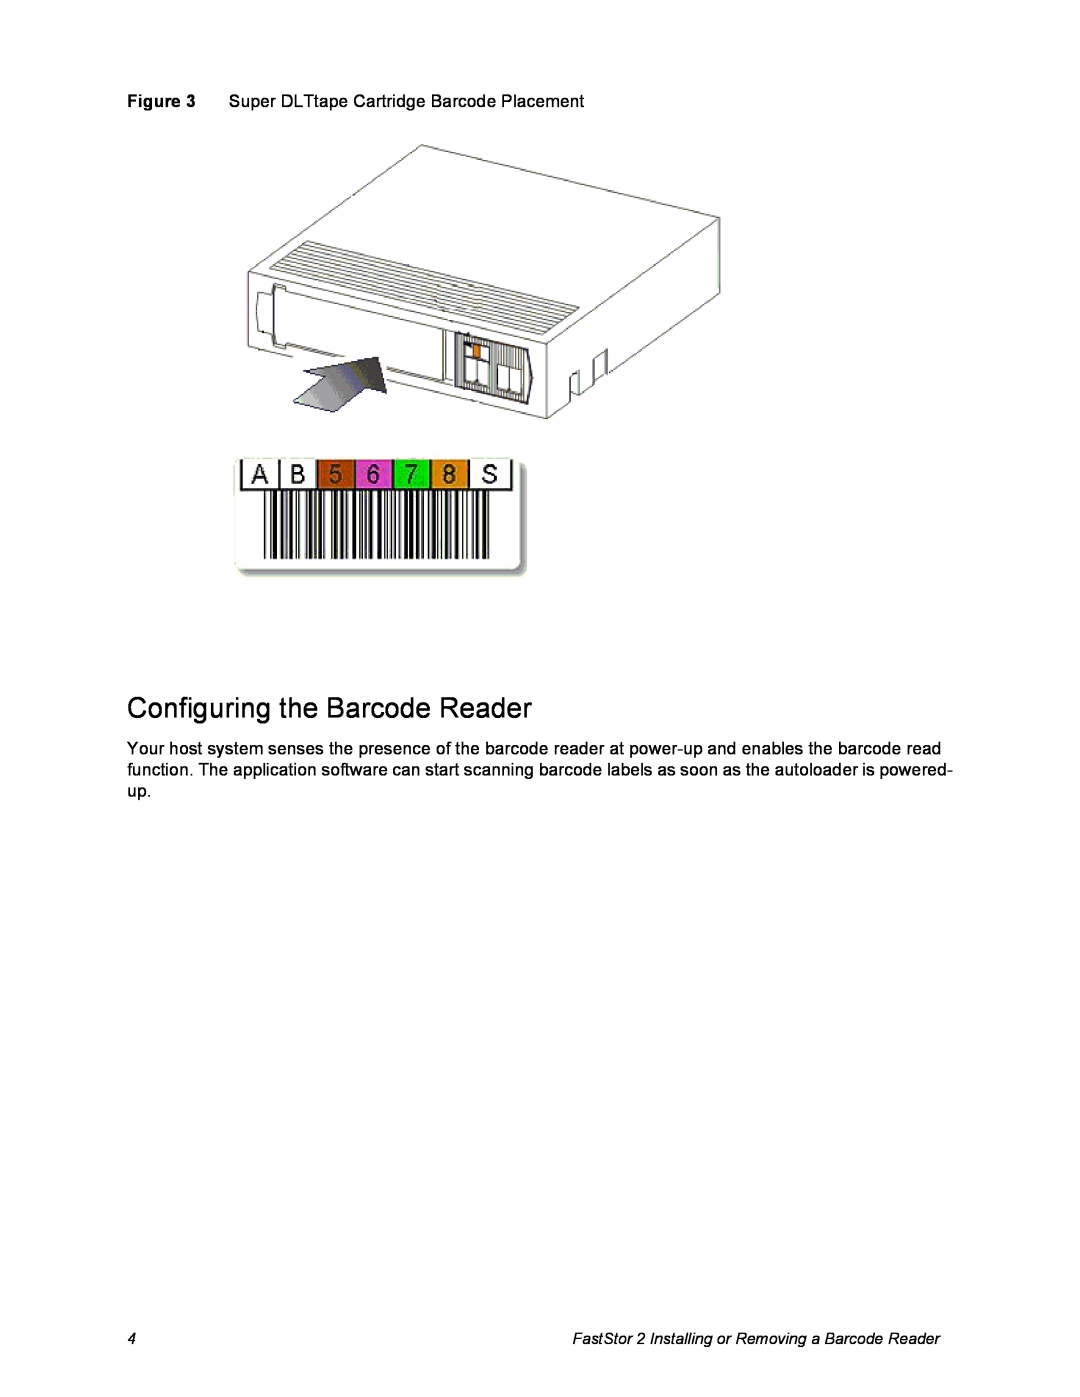 ADIC 2 manual Configuring the Barcode Reader, Super DLTtape Cartridge Barcode Placement 